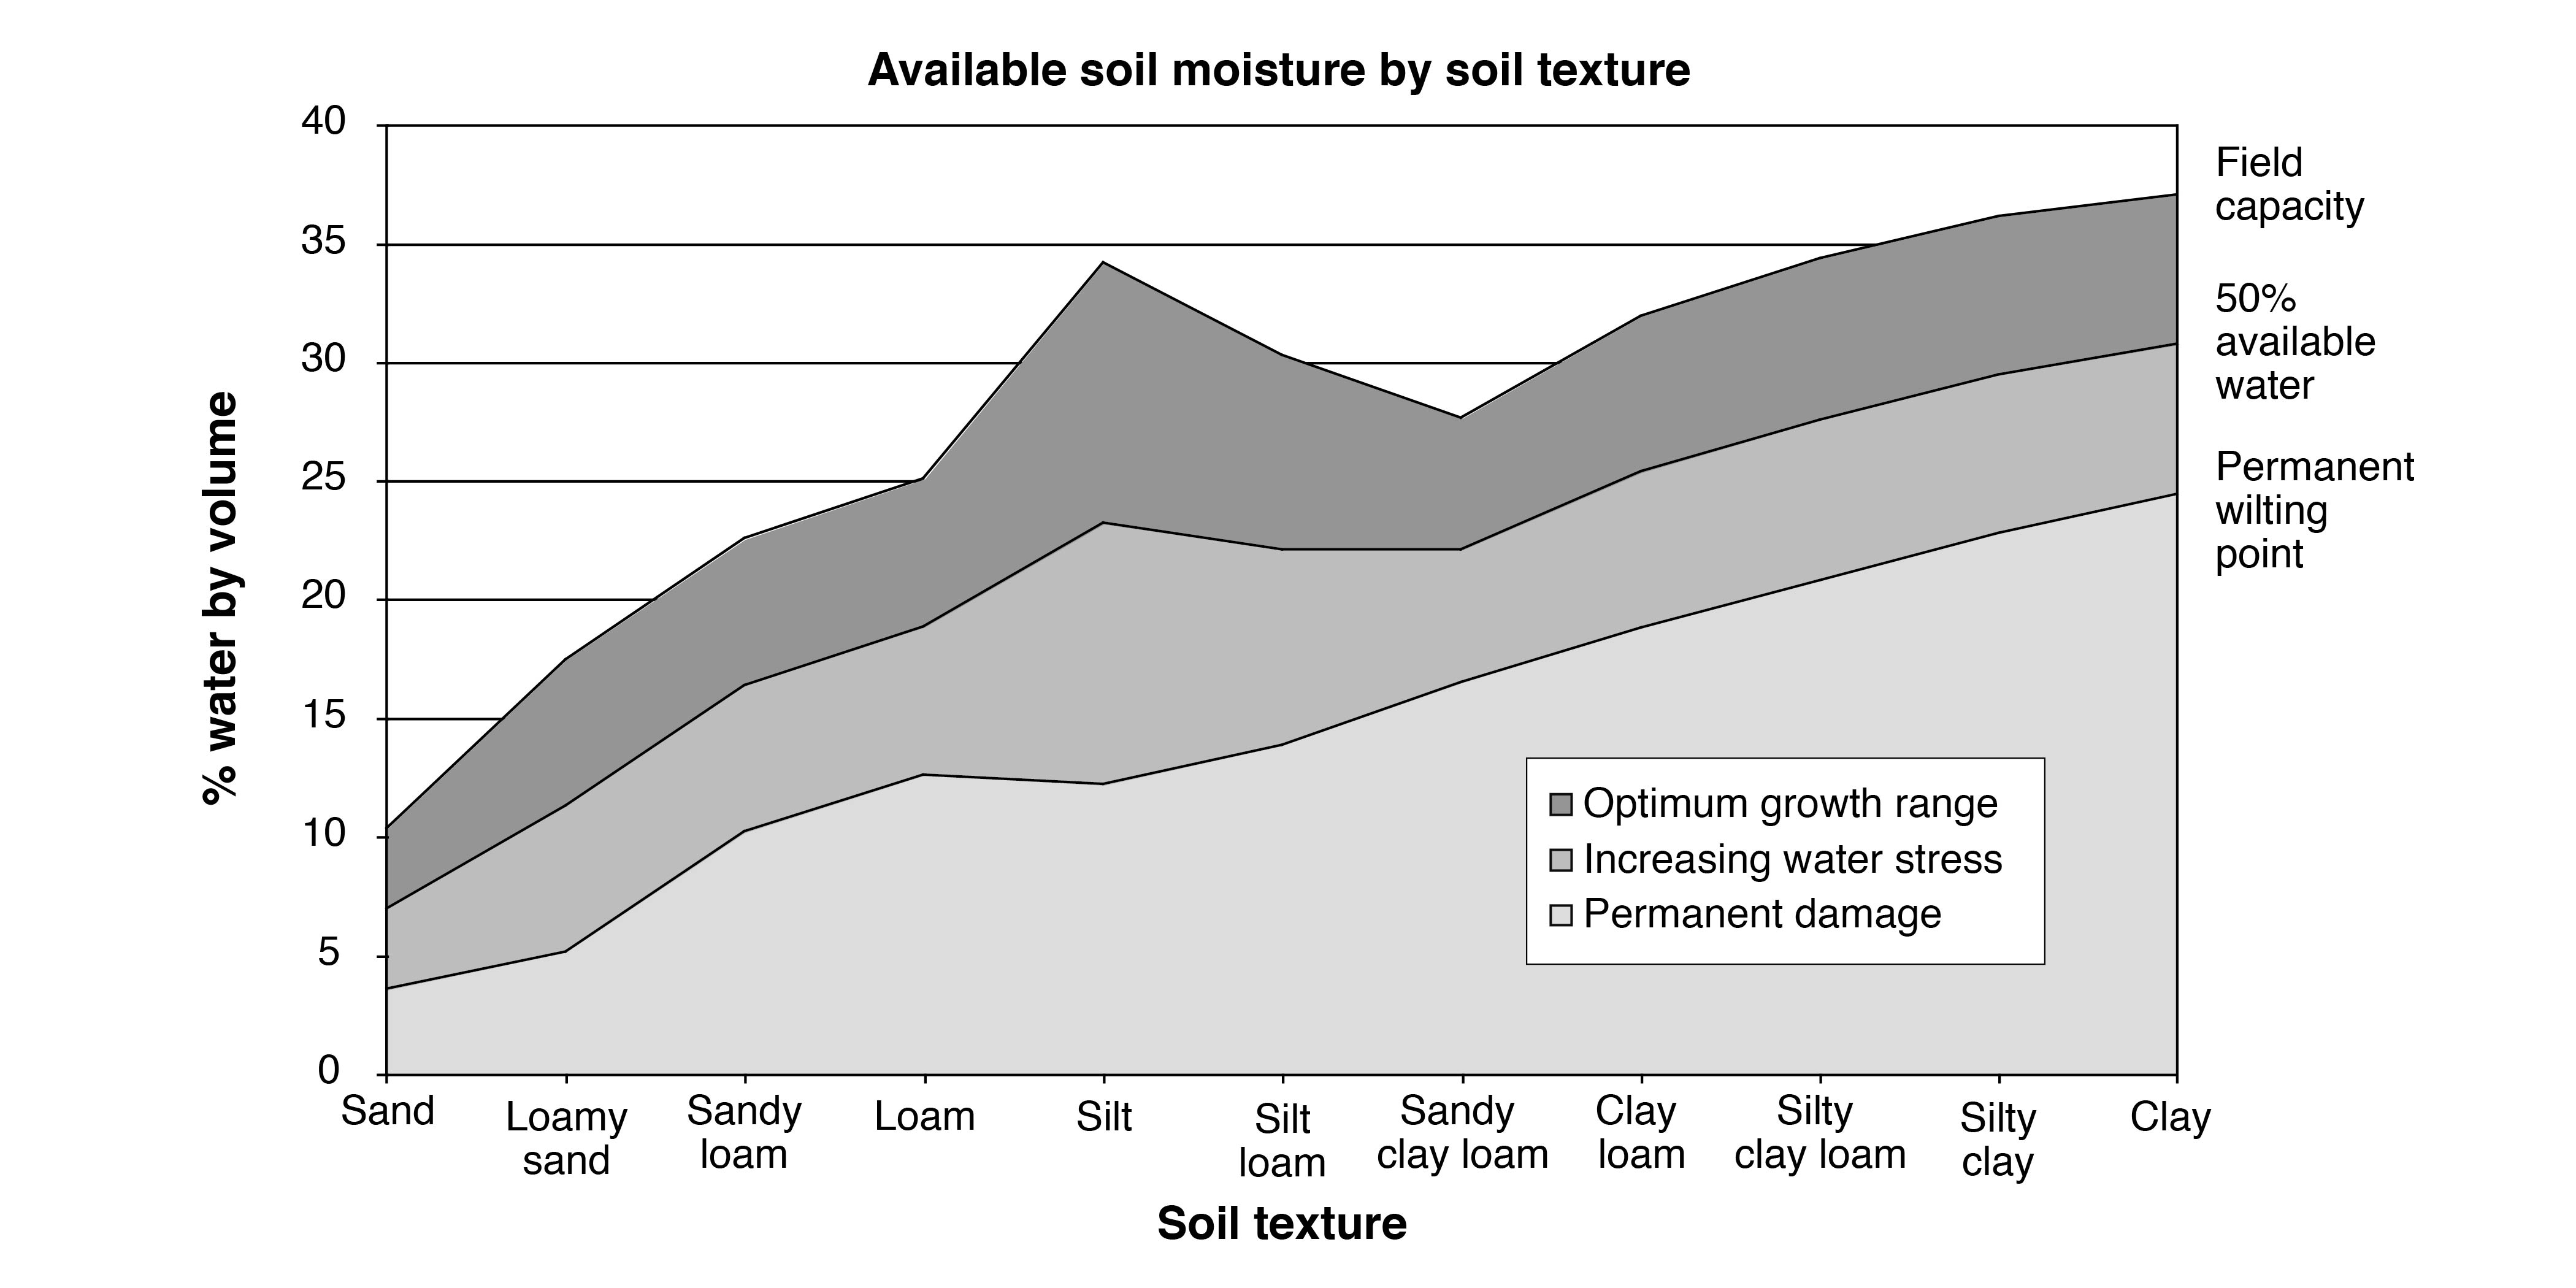 Graph of available soil moisture by soil texture and related to % water by volume. Silt loam and loam have greatest available water holding capacity. Clays have greatest total water holding potential but two-thirds is unavailable and available portion is similar to other soil textures.